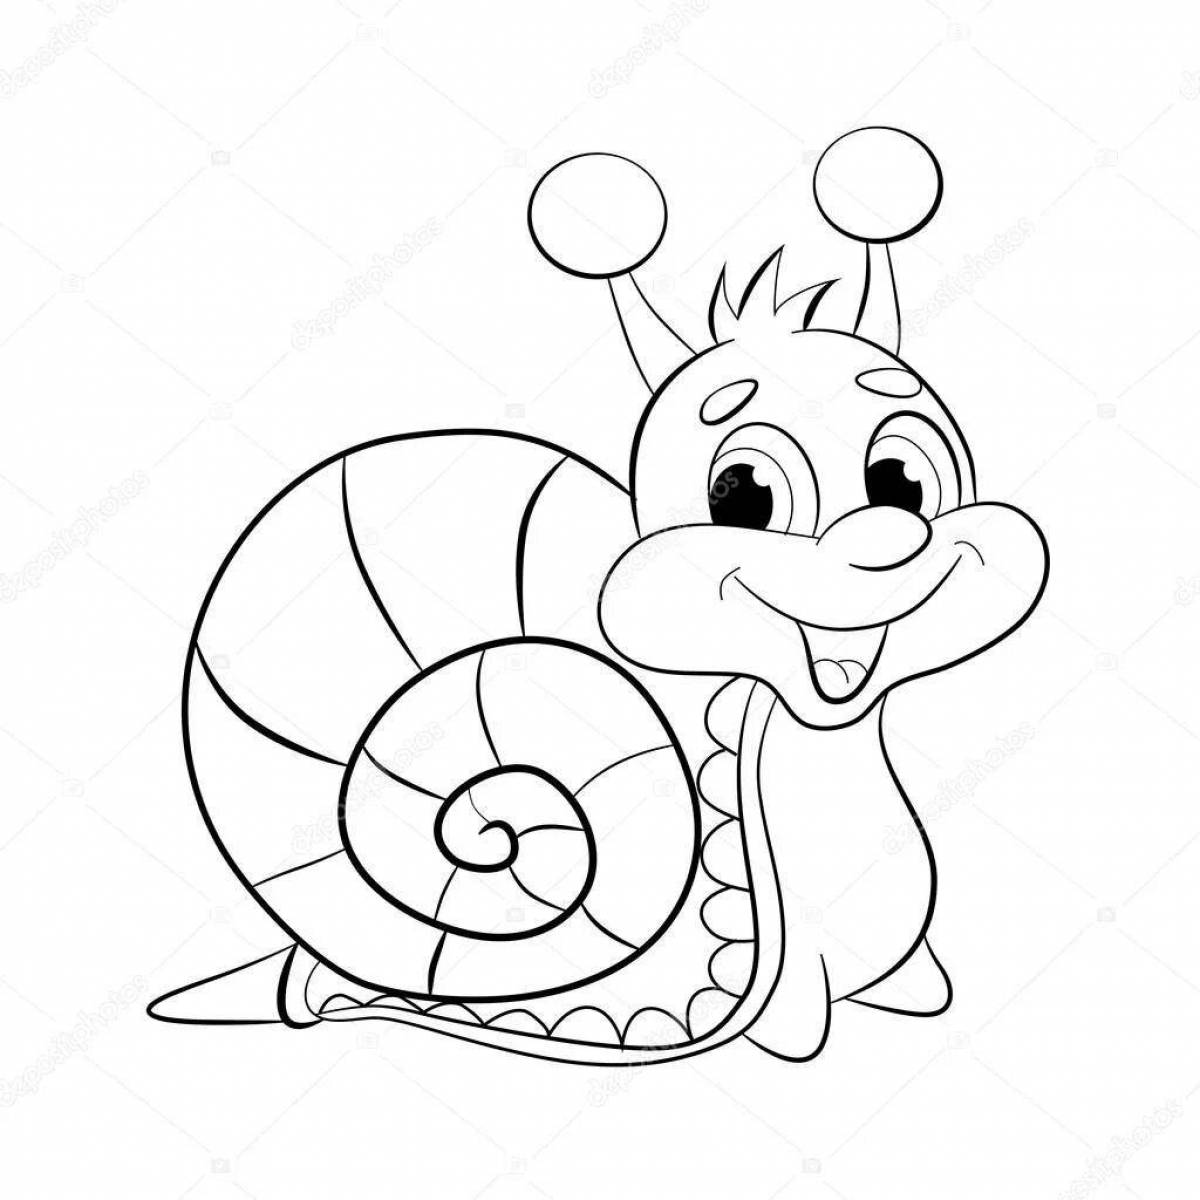 Colorful snail coloring page for kids